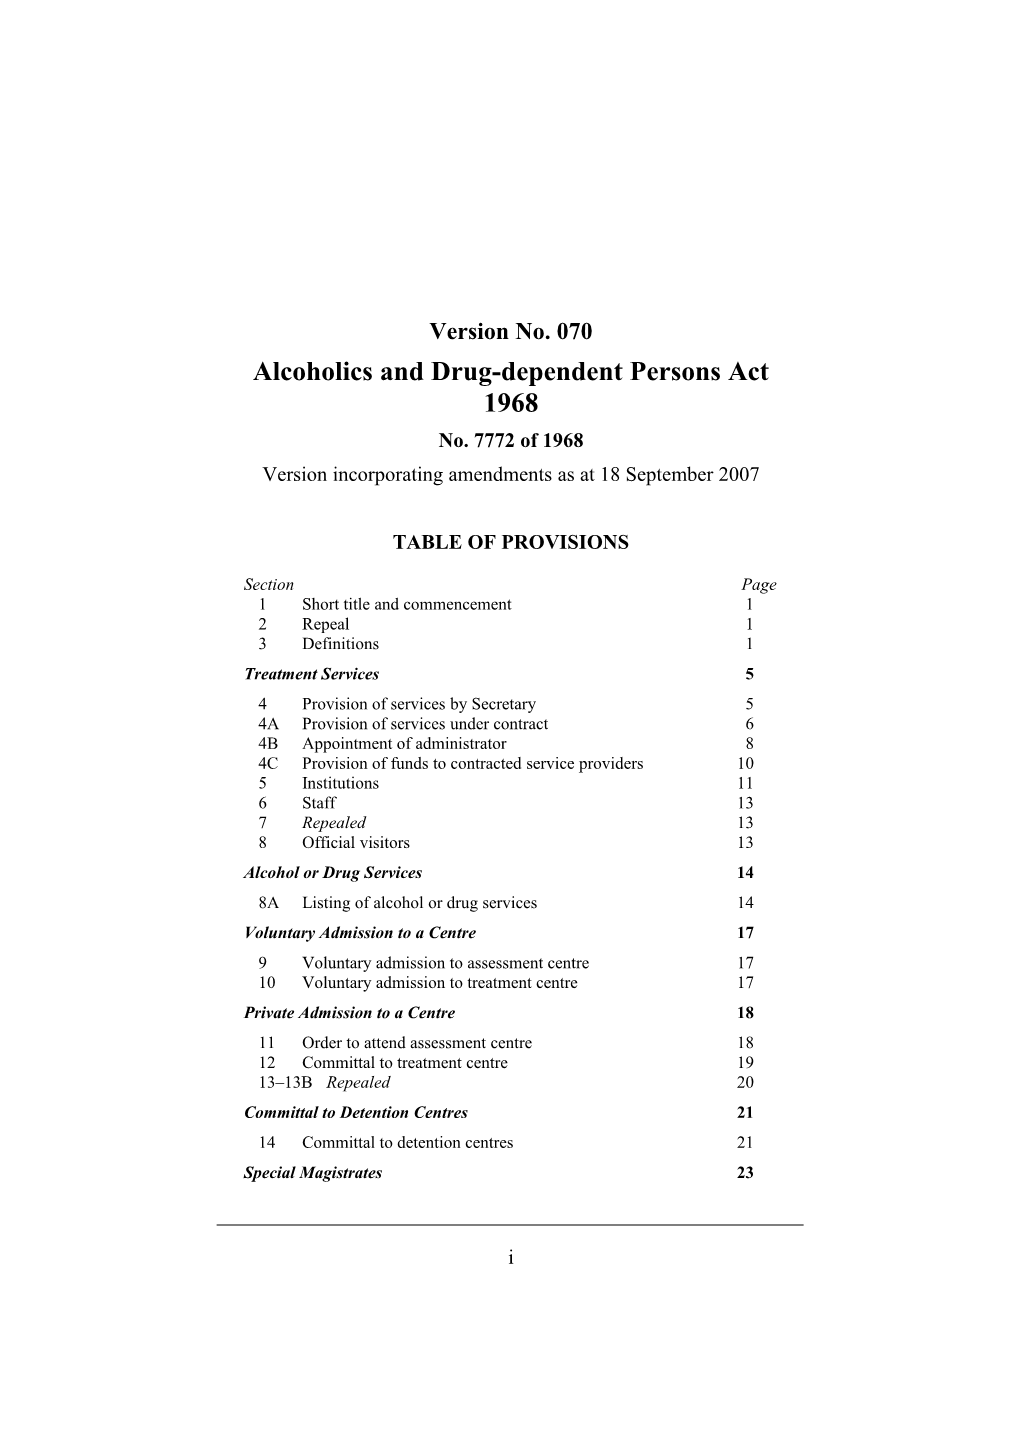 Alcoholics and Drug-Dependent Persons Act 1968